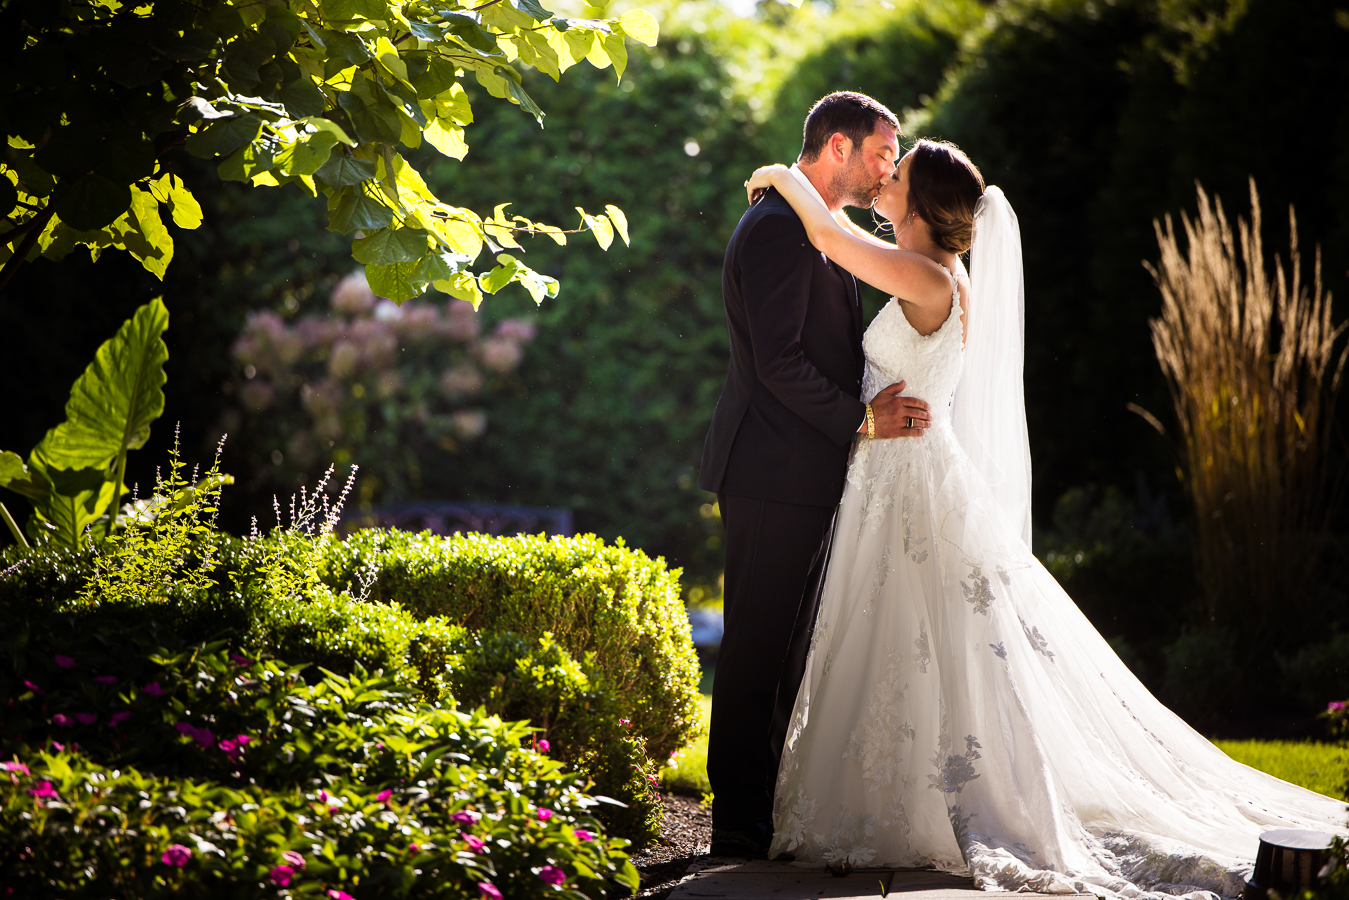 nj wedding photographer, lisa rhinehart, captures this vibrant, colorful image of the bride and groom as they share a kiss in the outdoor gardens at the palace at somerset park in new jersey 